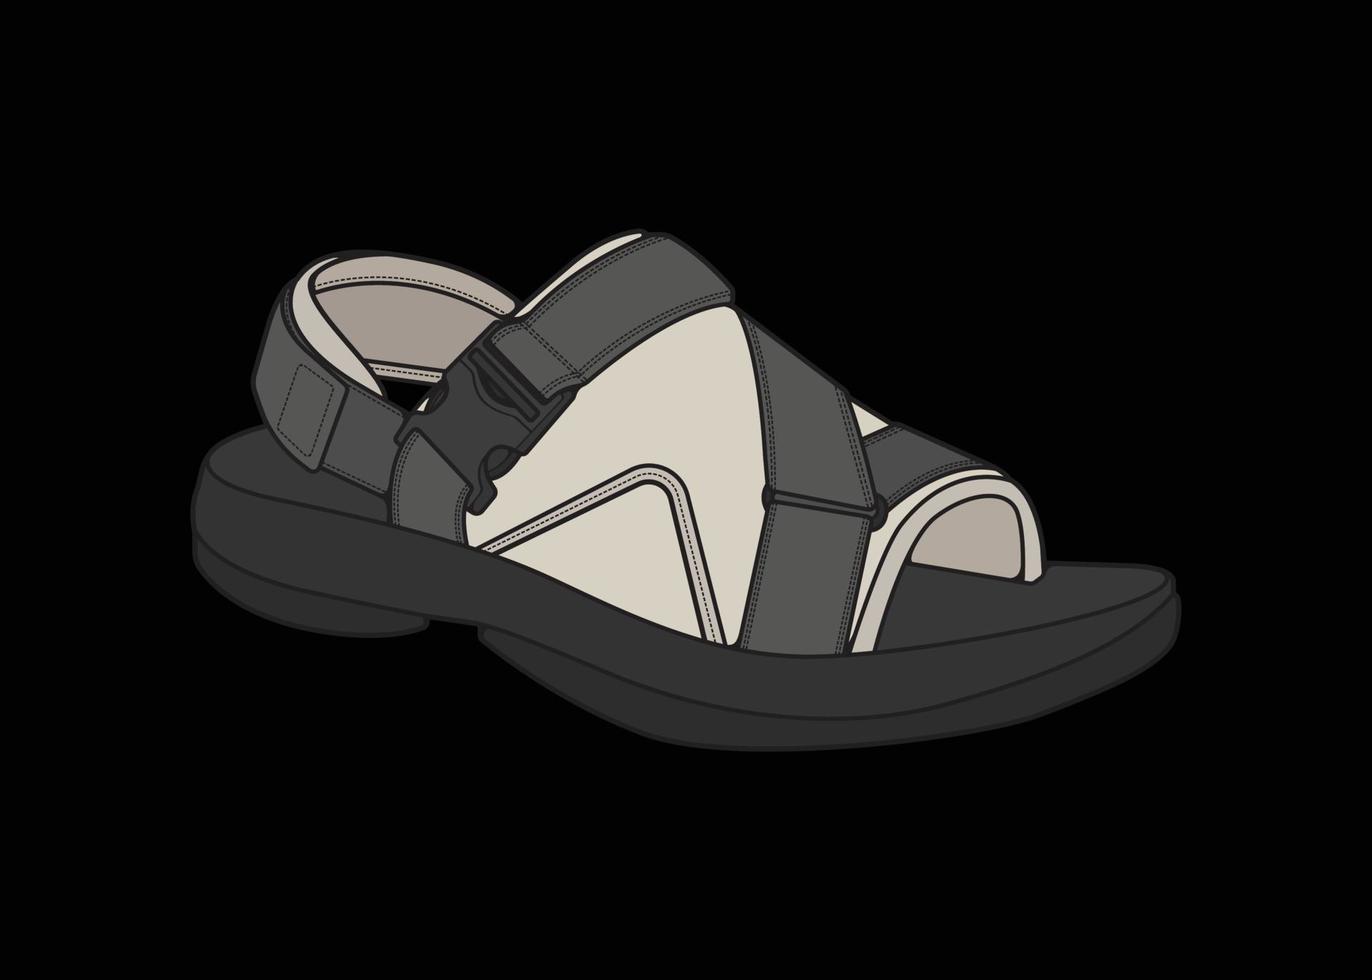 strap sandals multicolor drawing vector, strap sandals in a multicolor style, vector Illustration. with black background